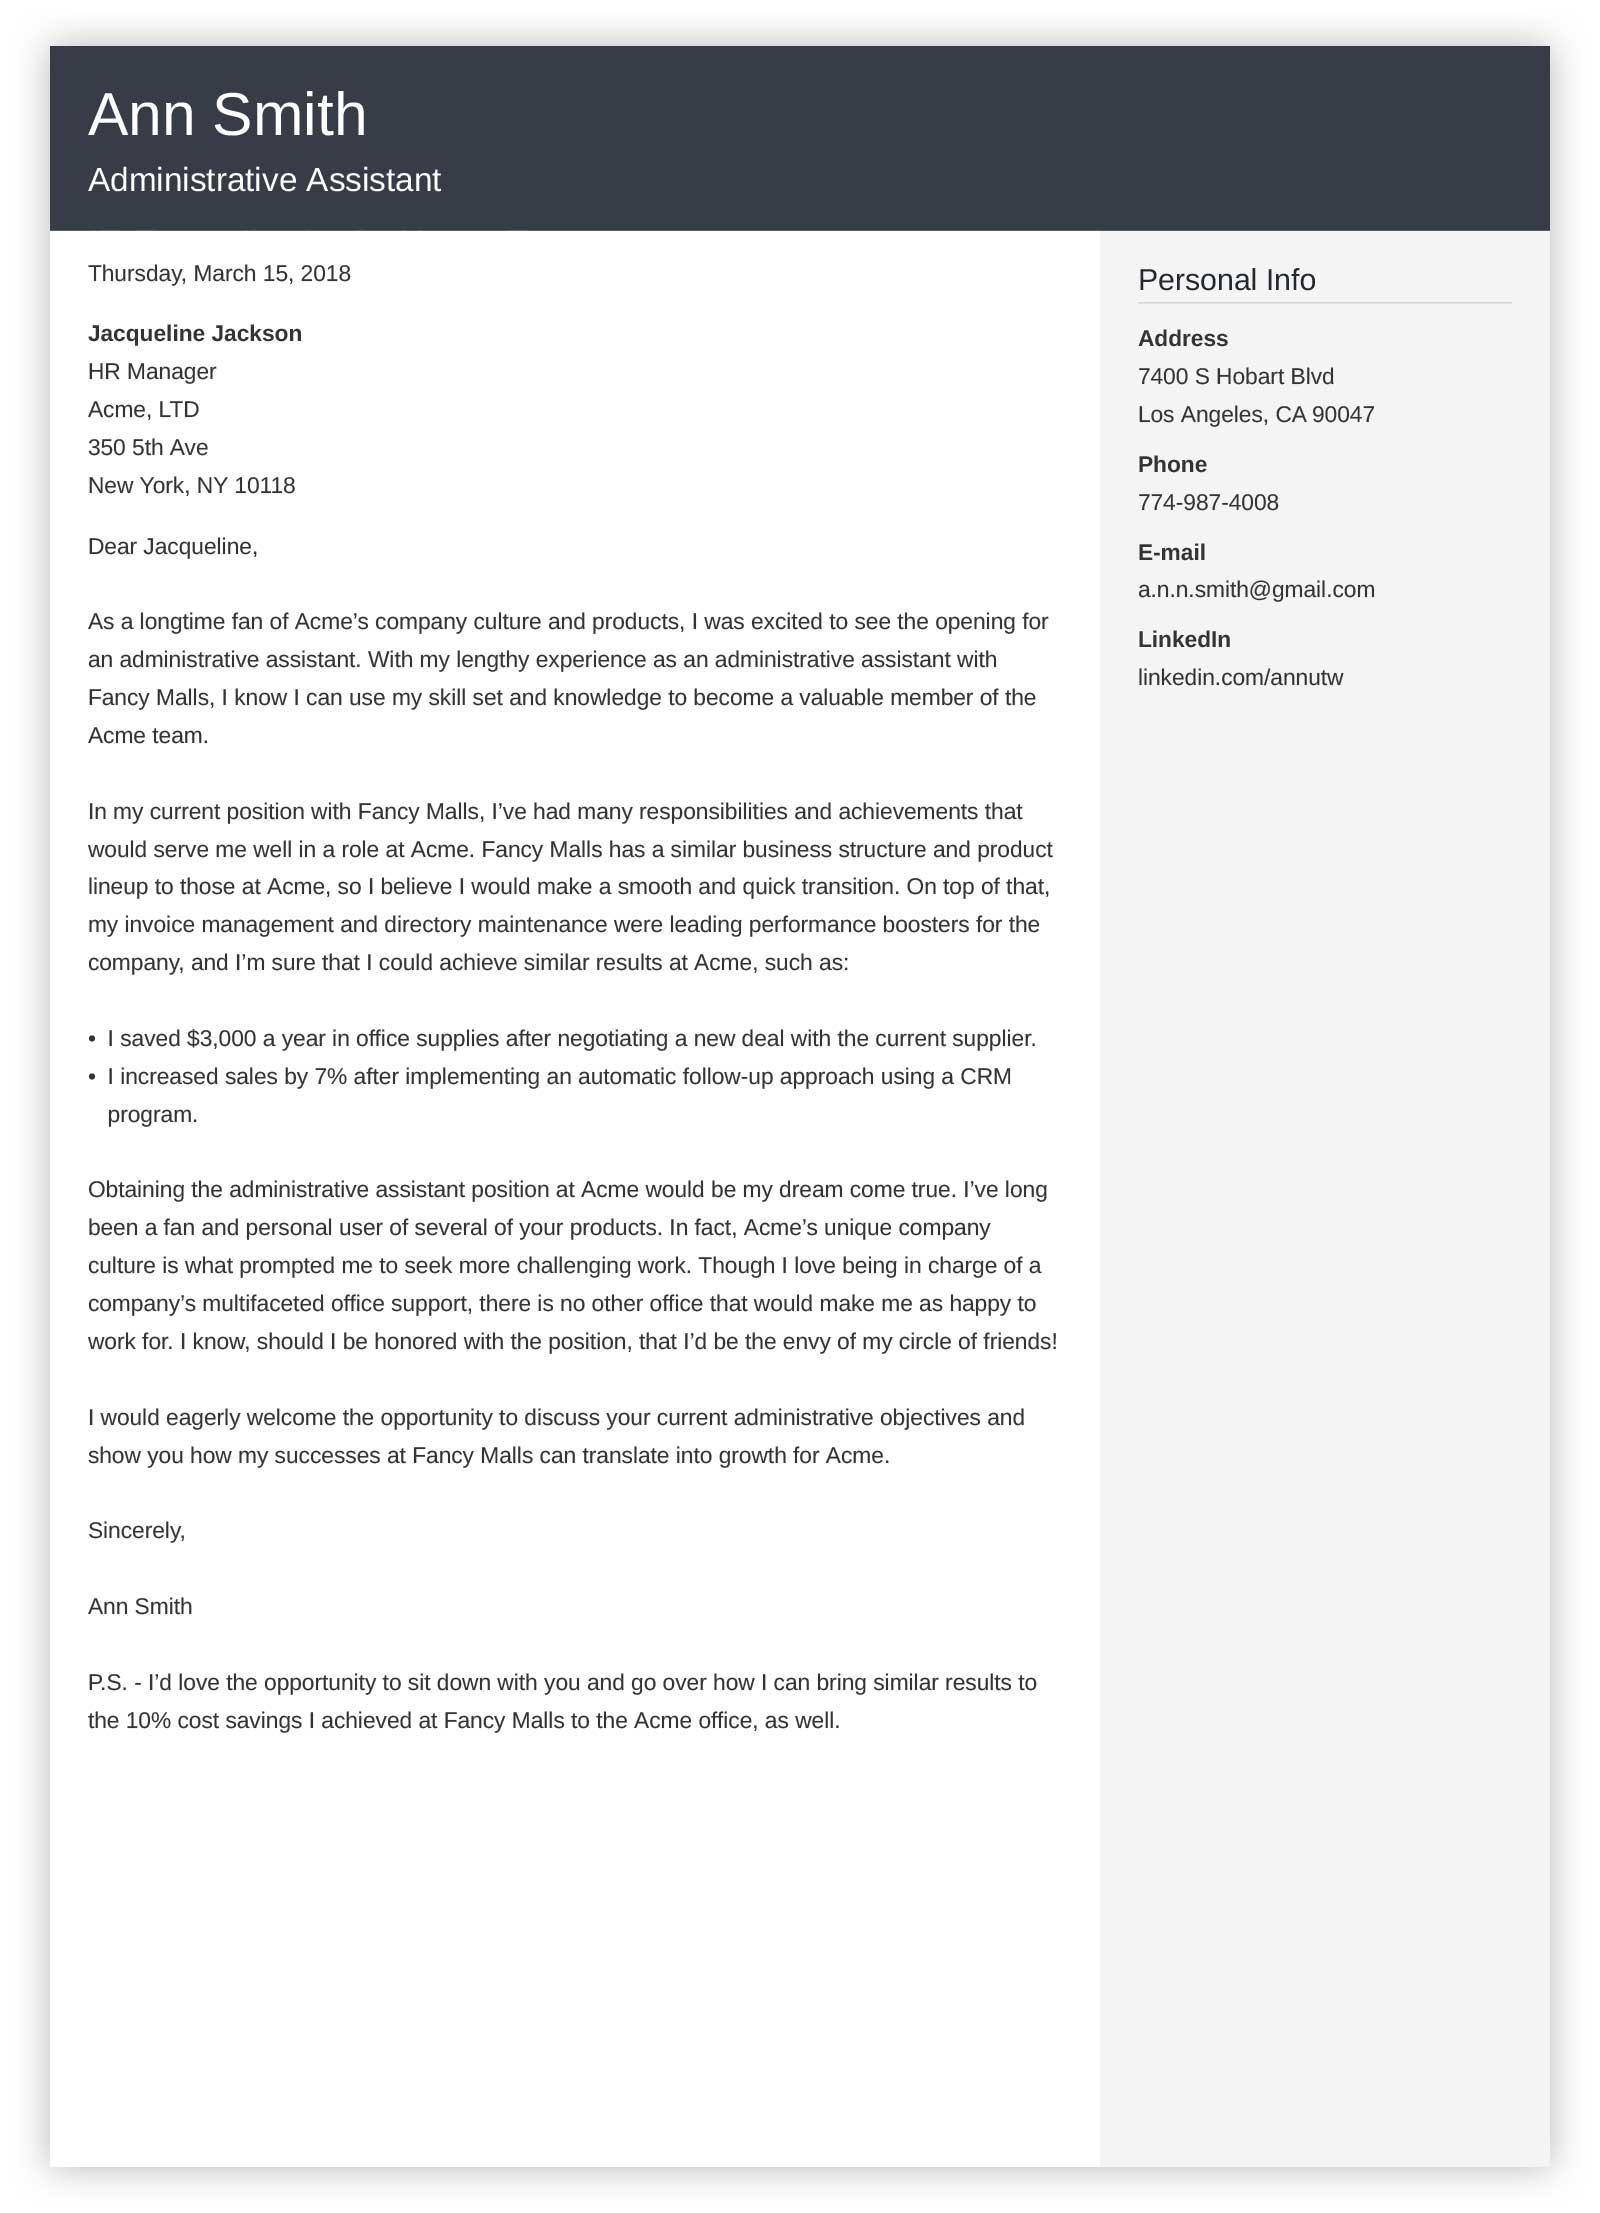 Administrative Assistant Cover Letter Sample & 20+ Tips